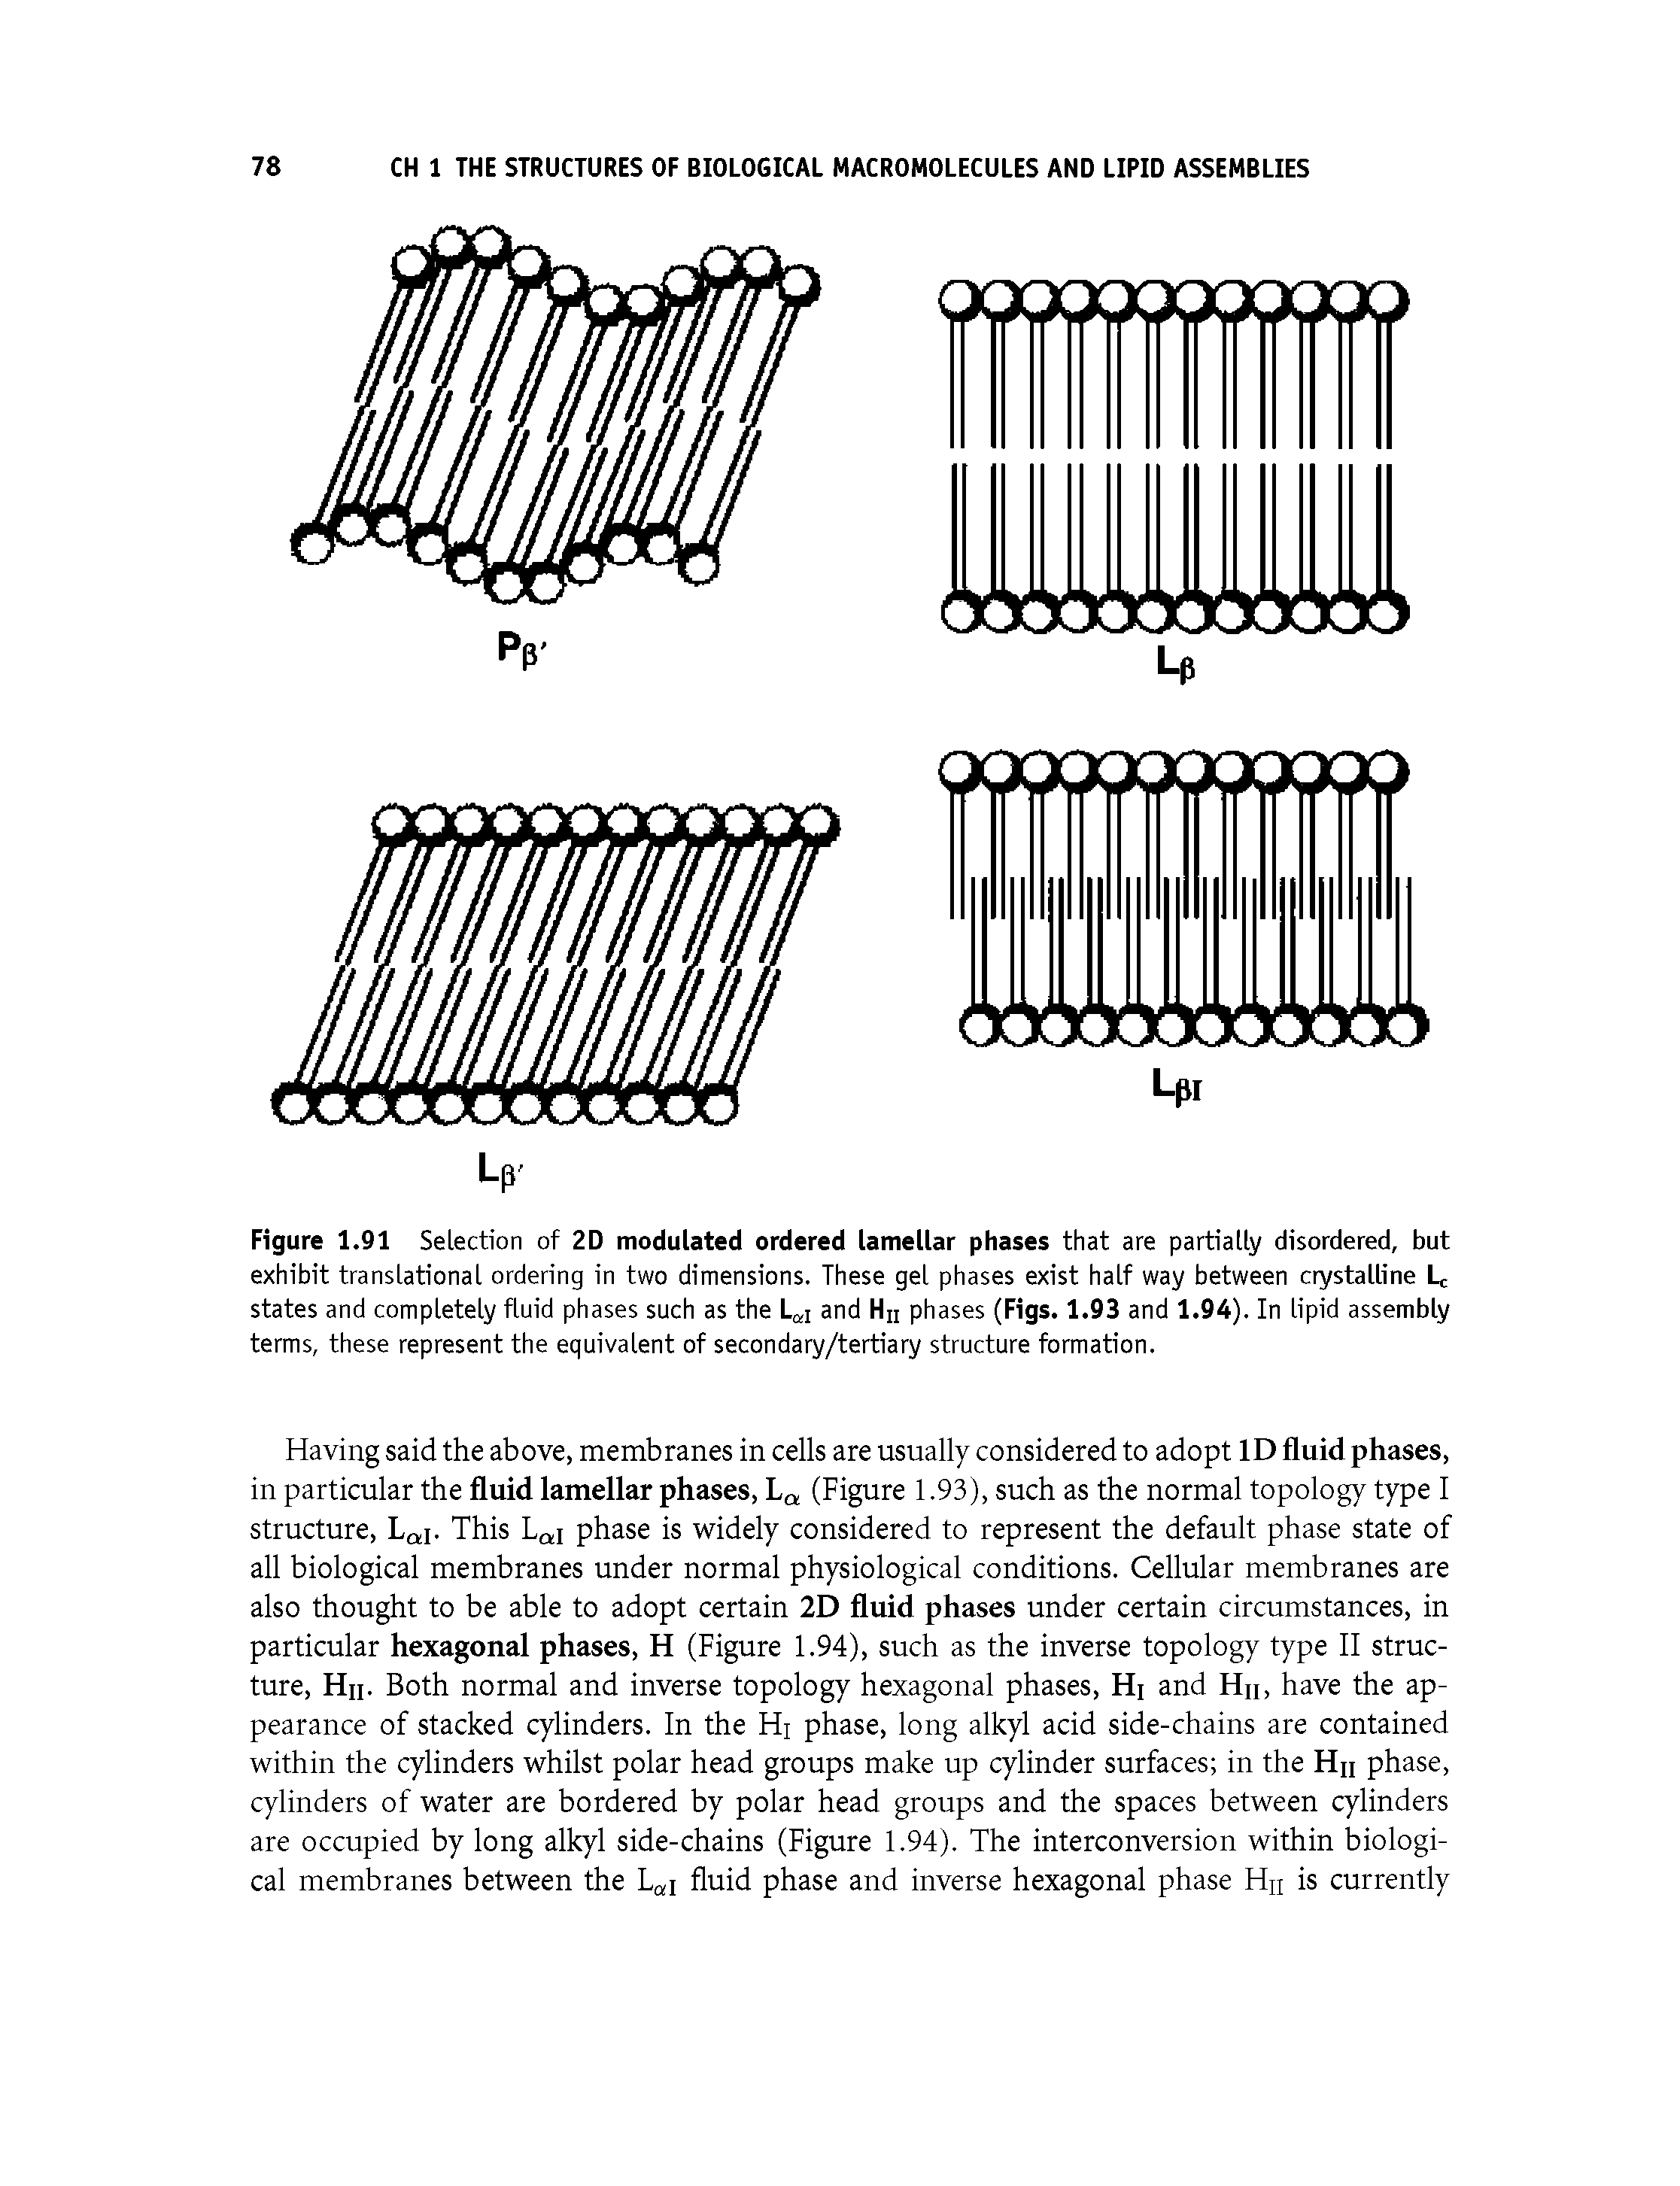 Figure 1.91 Selection of 2D modulated ordered lamellar phases that are partially disordered, but exhibit translational ordering in two dimensions. These gel phases exist half way between crystalline Lc states and completely fluid phases such as the Lai and Hn phases (Figs. 1.93 and 1.94). In lipid assembly terms, these represent the equivalent of secondary/tertiary structure formation.